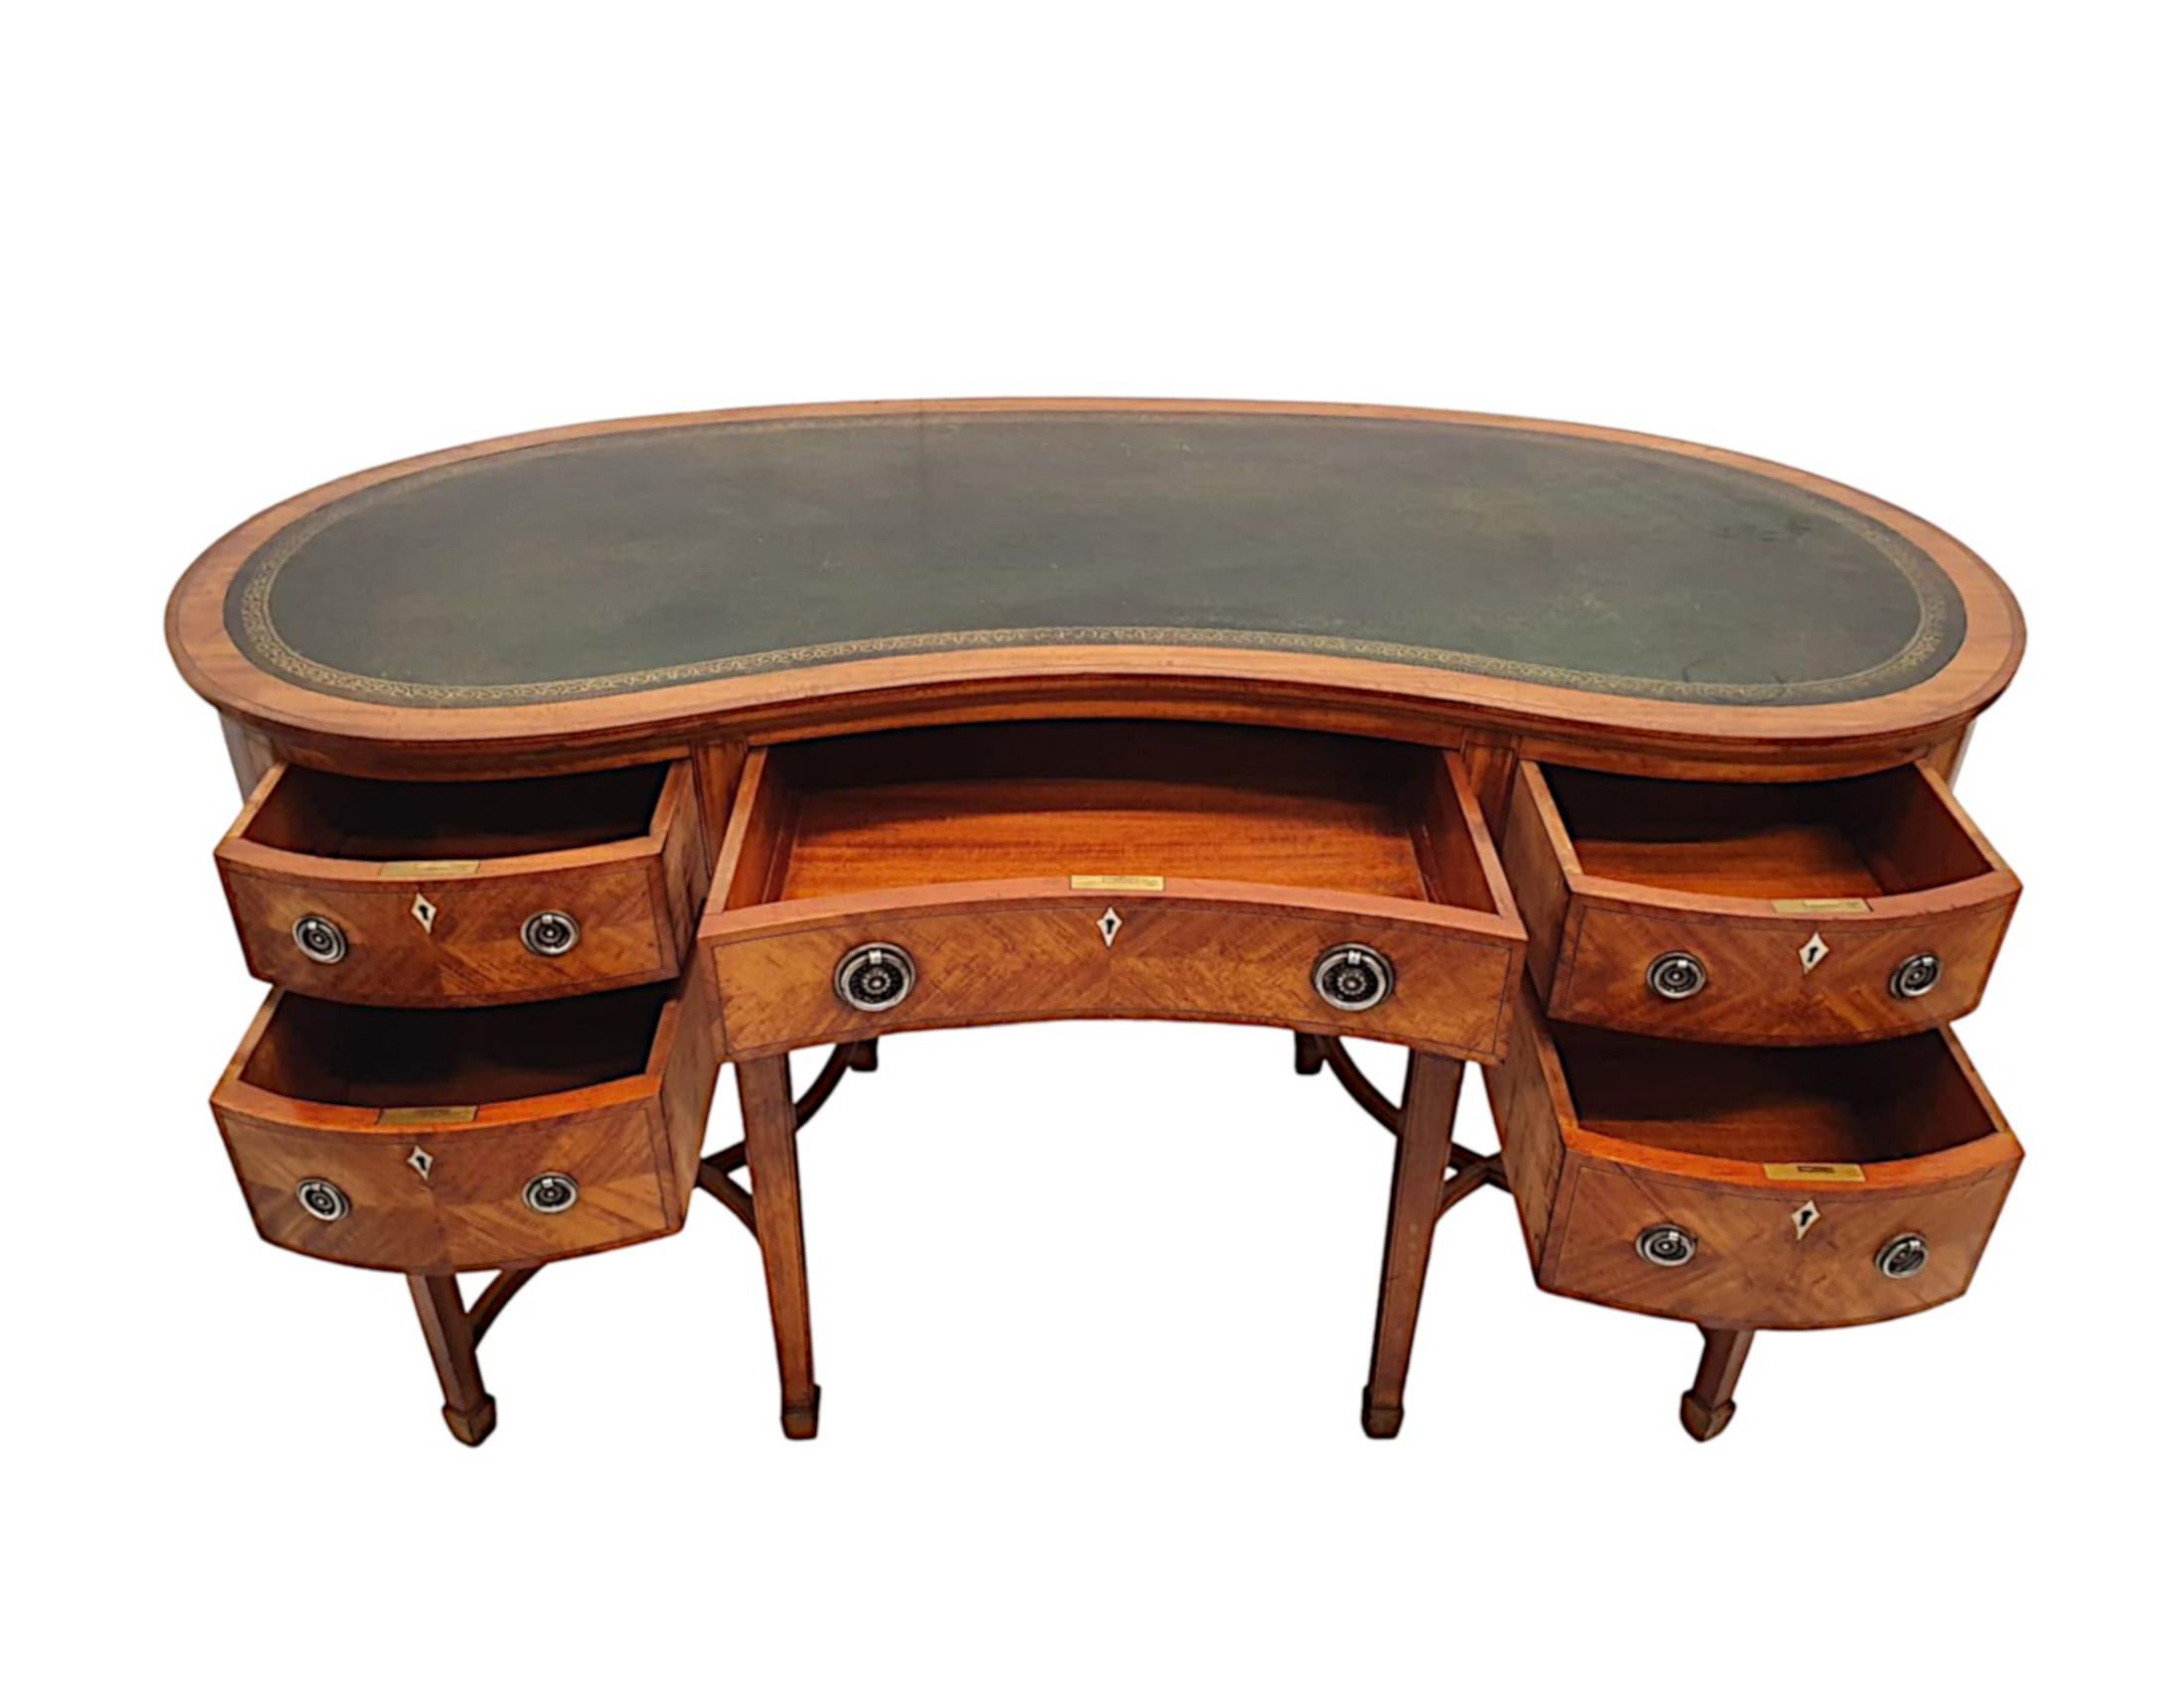 Stunning Edwardian Satinwood Kidney Shaped Desk In Good Condition For Sale In Dublin, IE